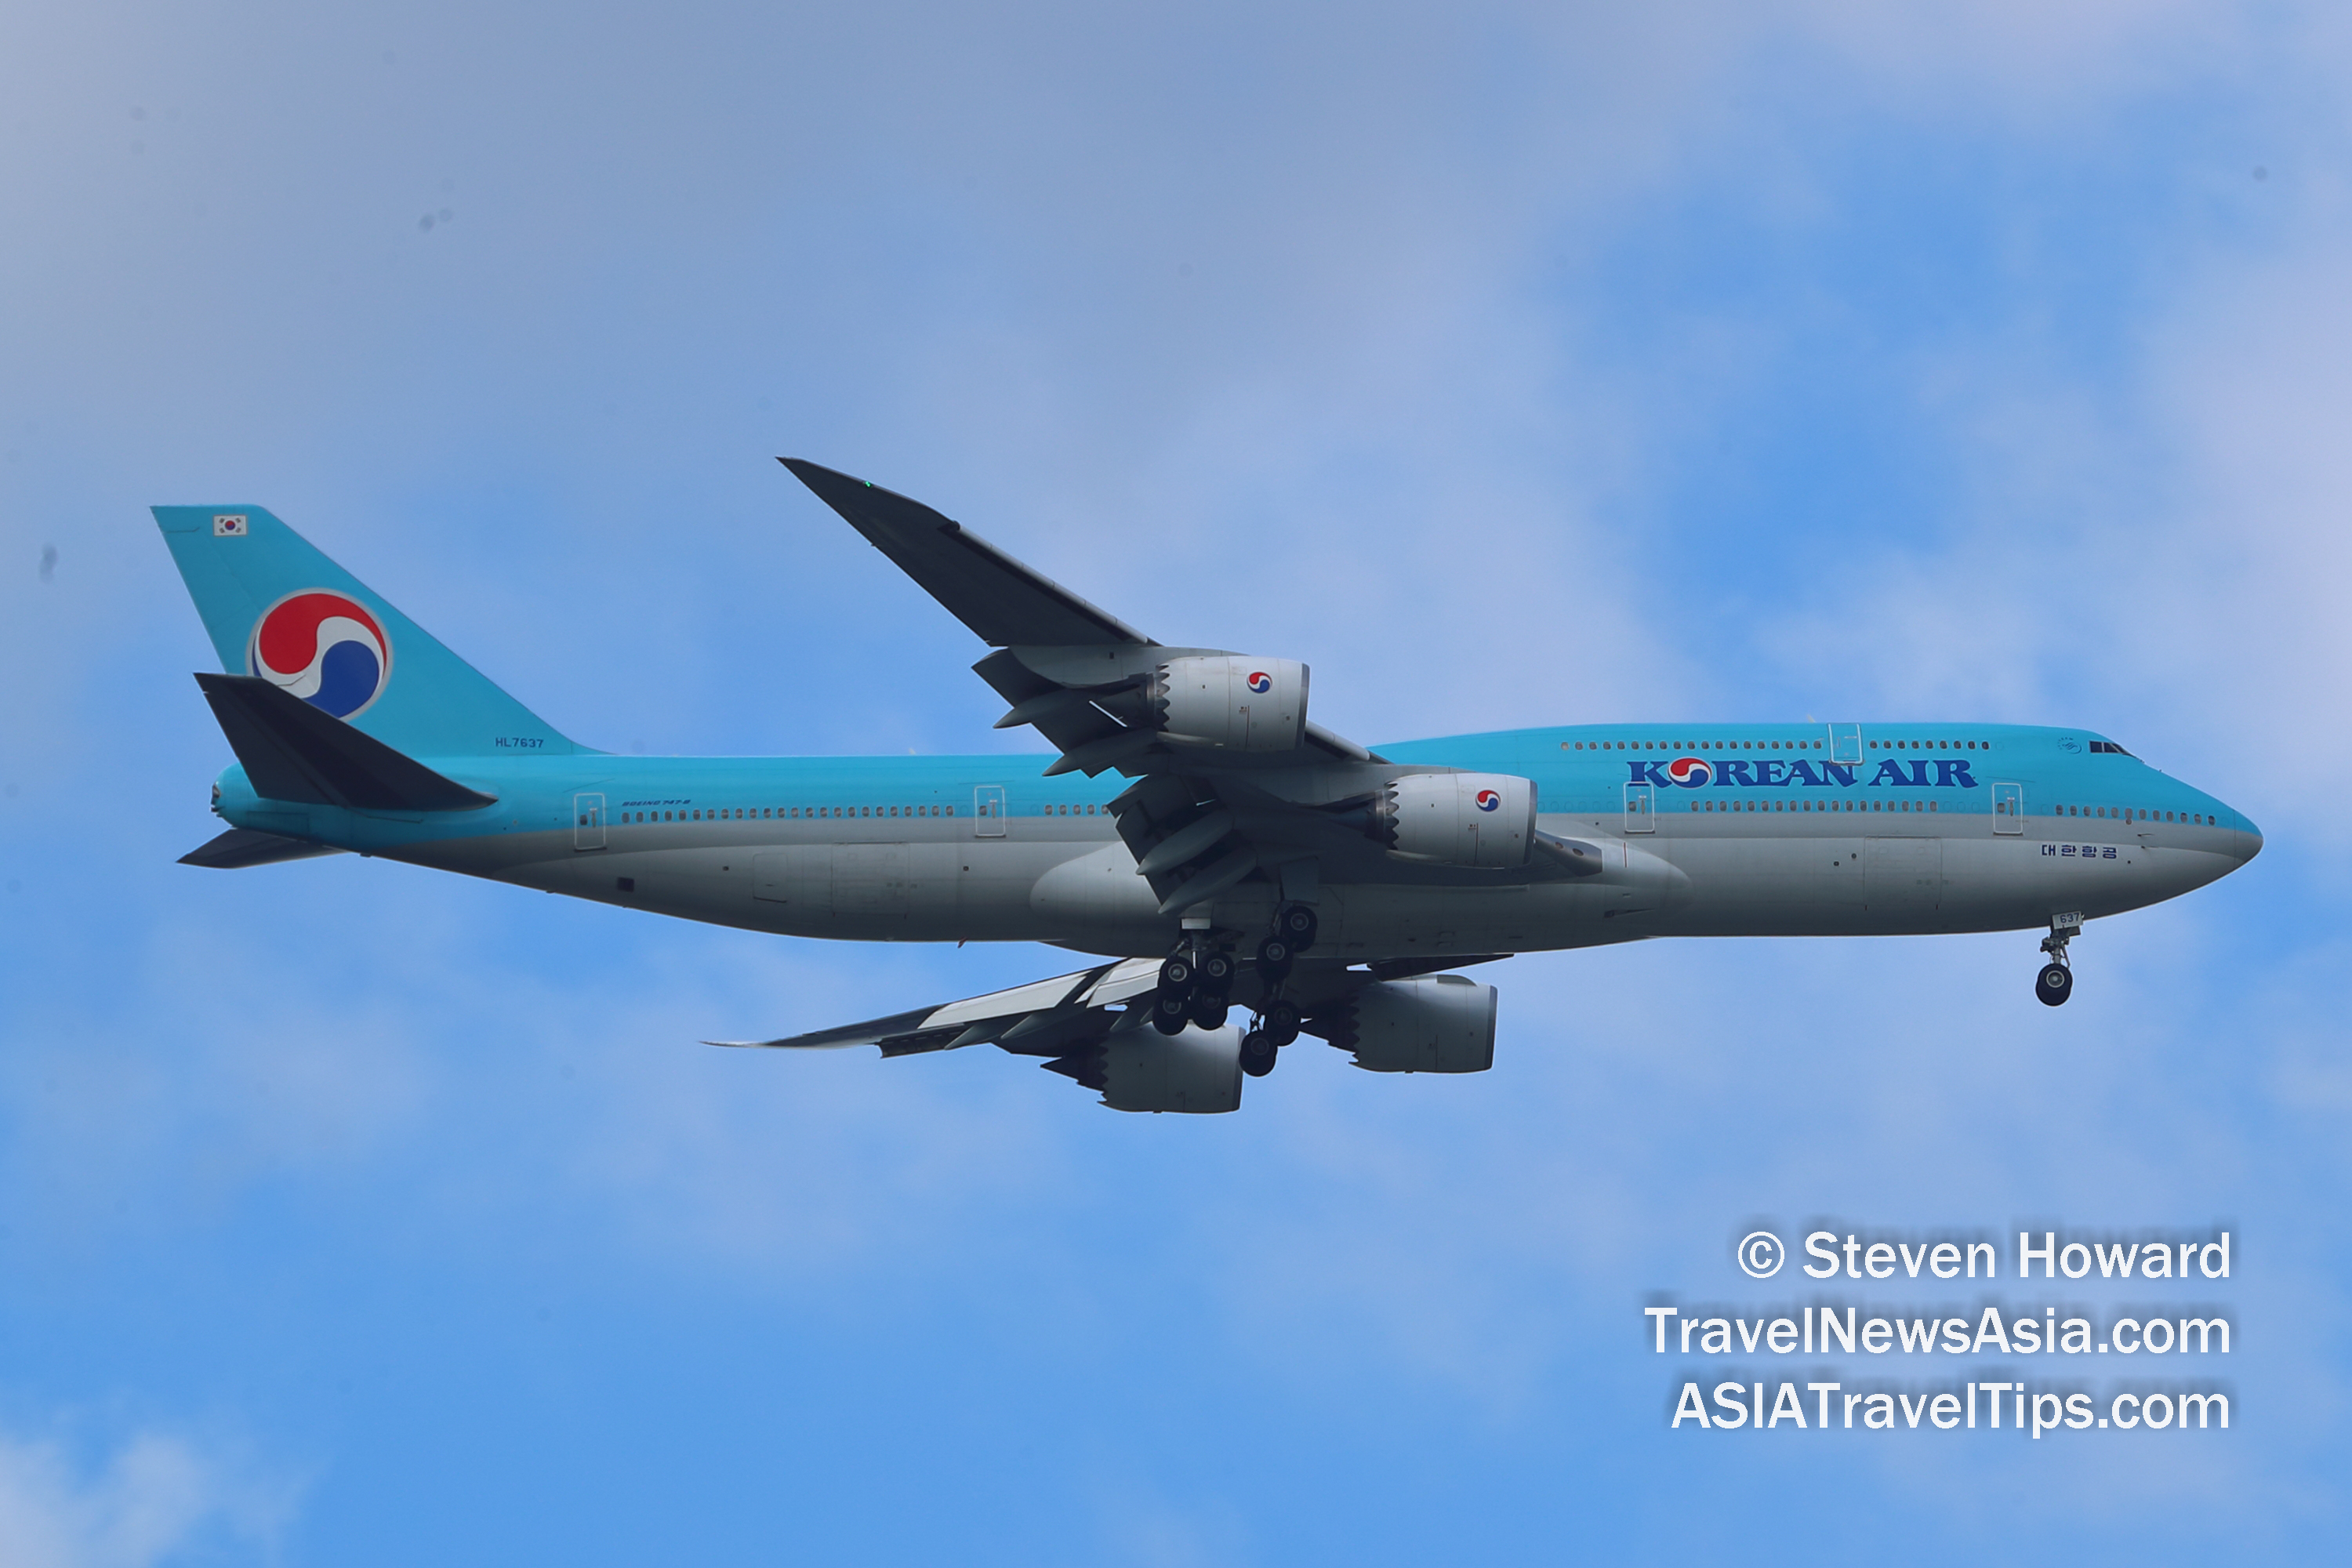 Korean Air Boeing 747-8 reg: HL7637. Picture by Steven Howard of TravelNewsAsia.com Click to enlarge.